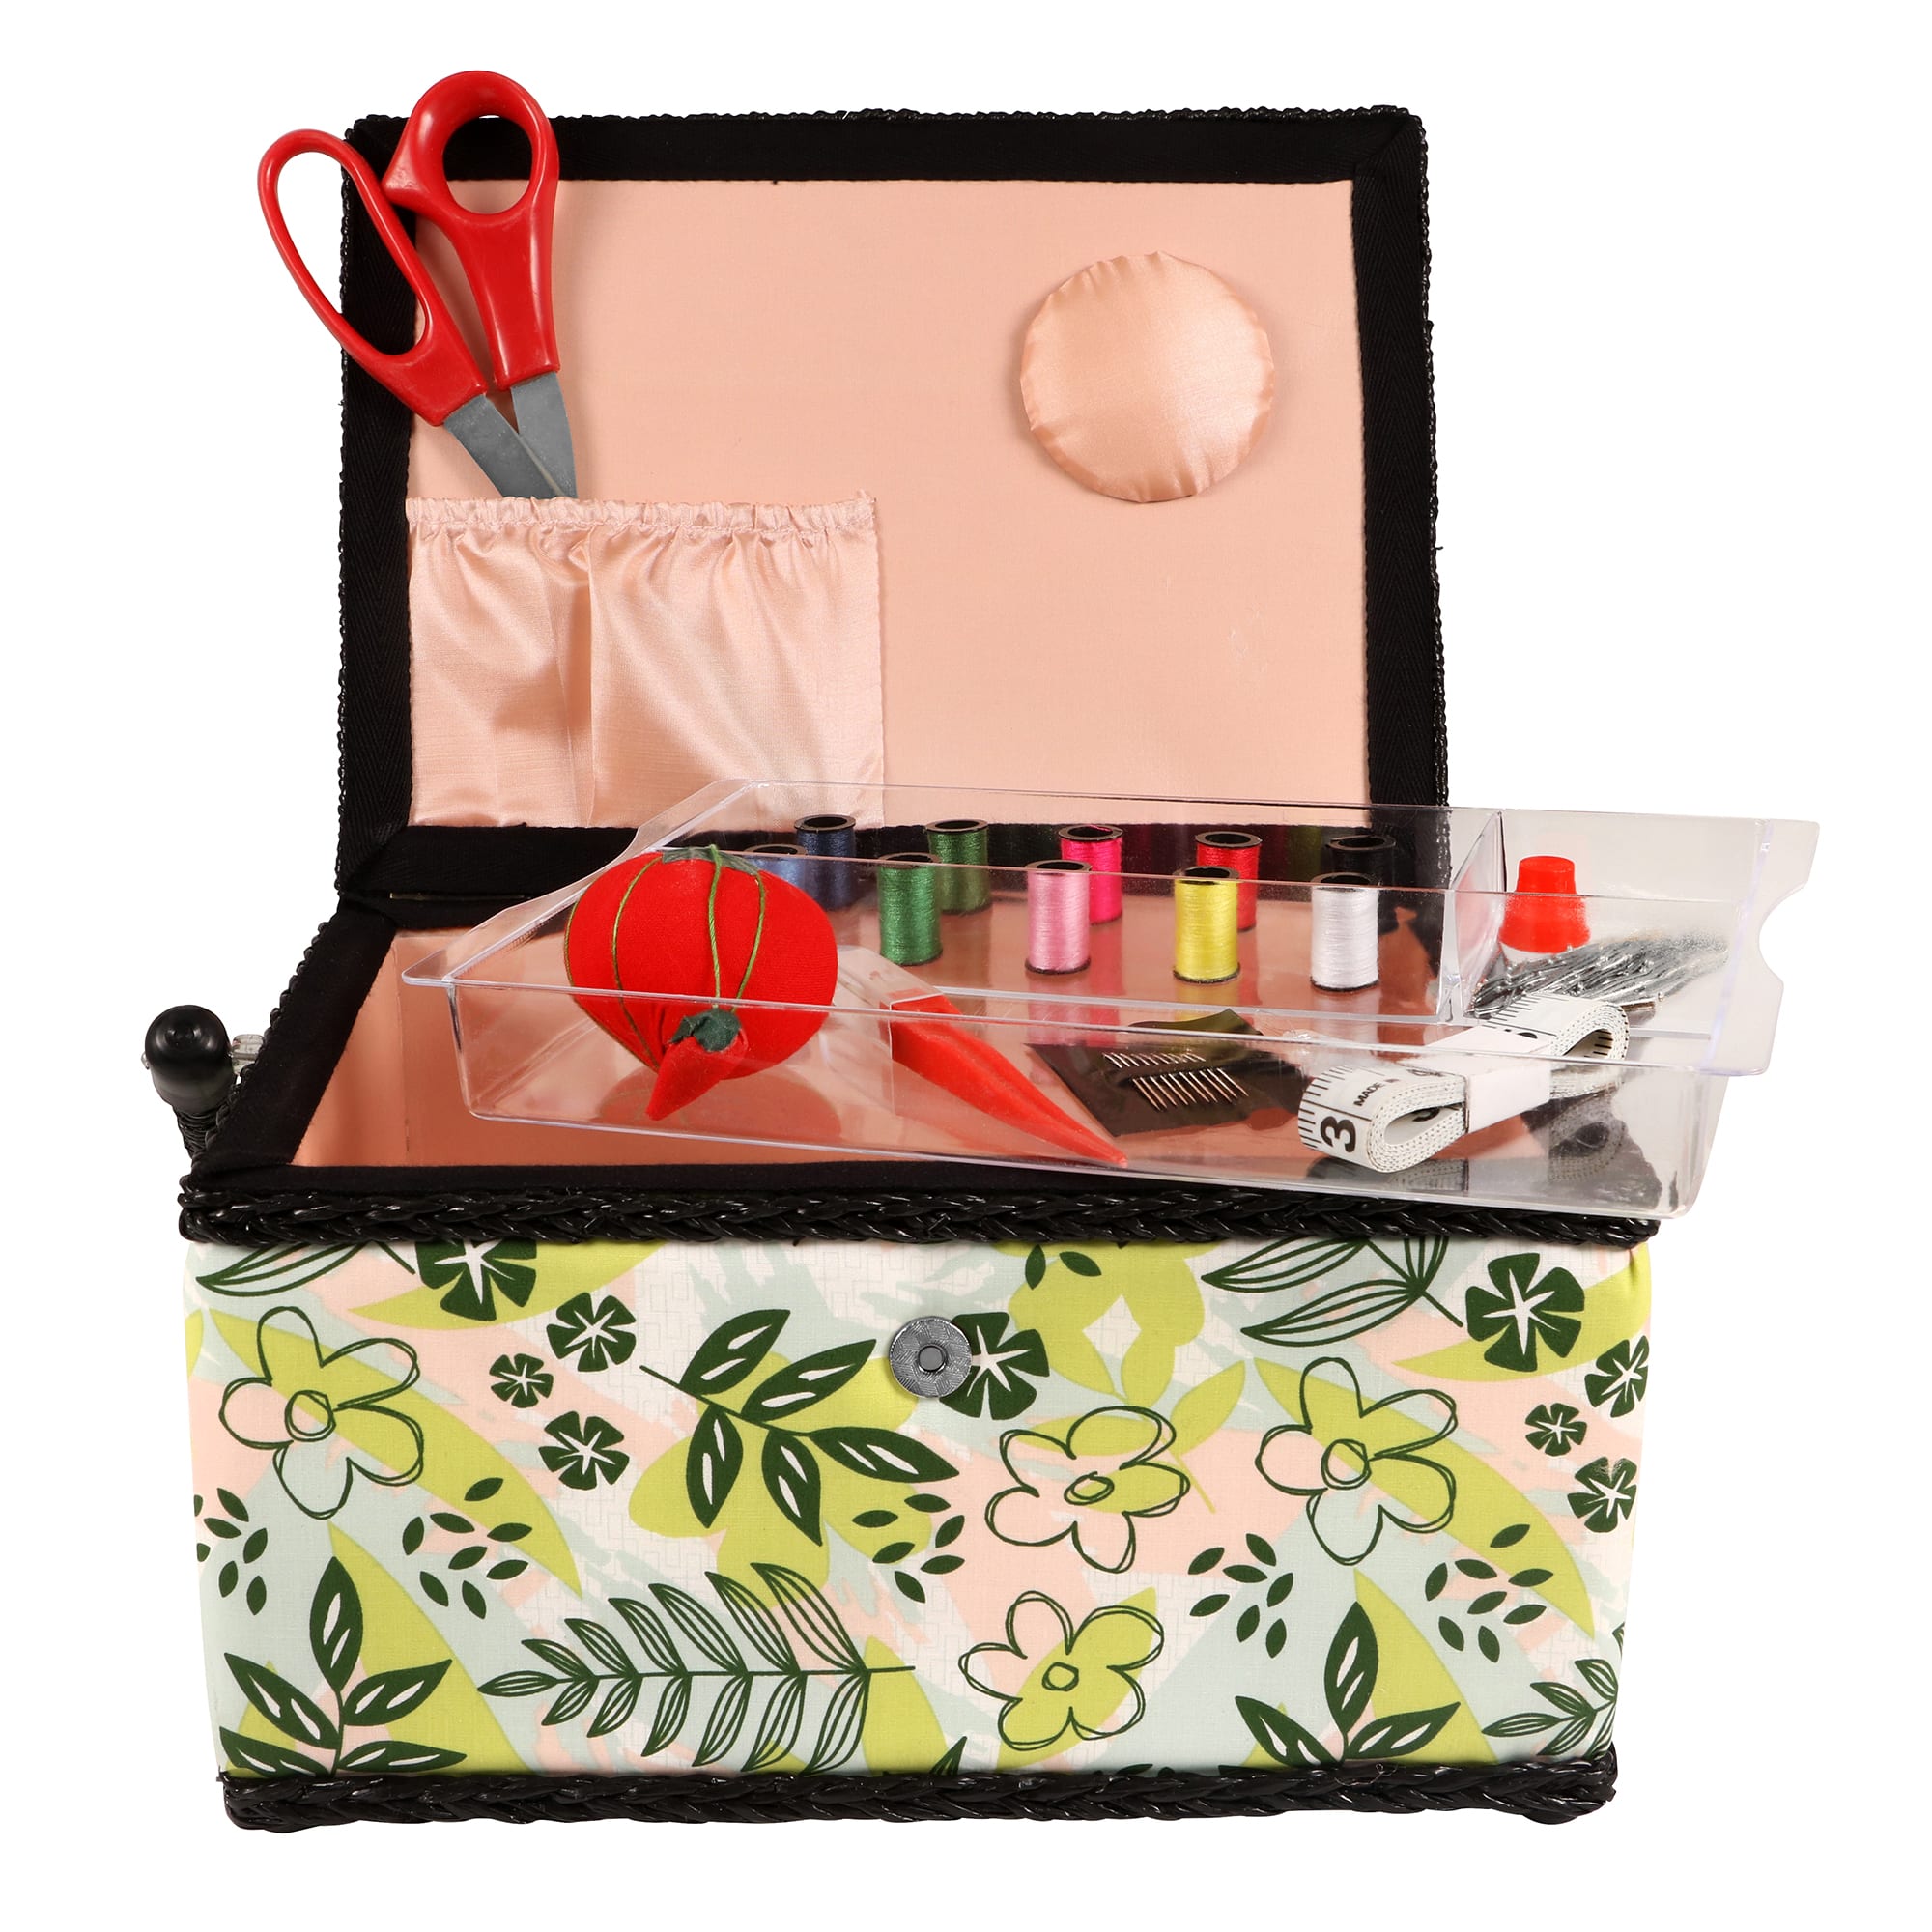  SINGER Sewing Basket with Sewing Kit Accessories (Organic  Natural Print)